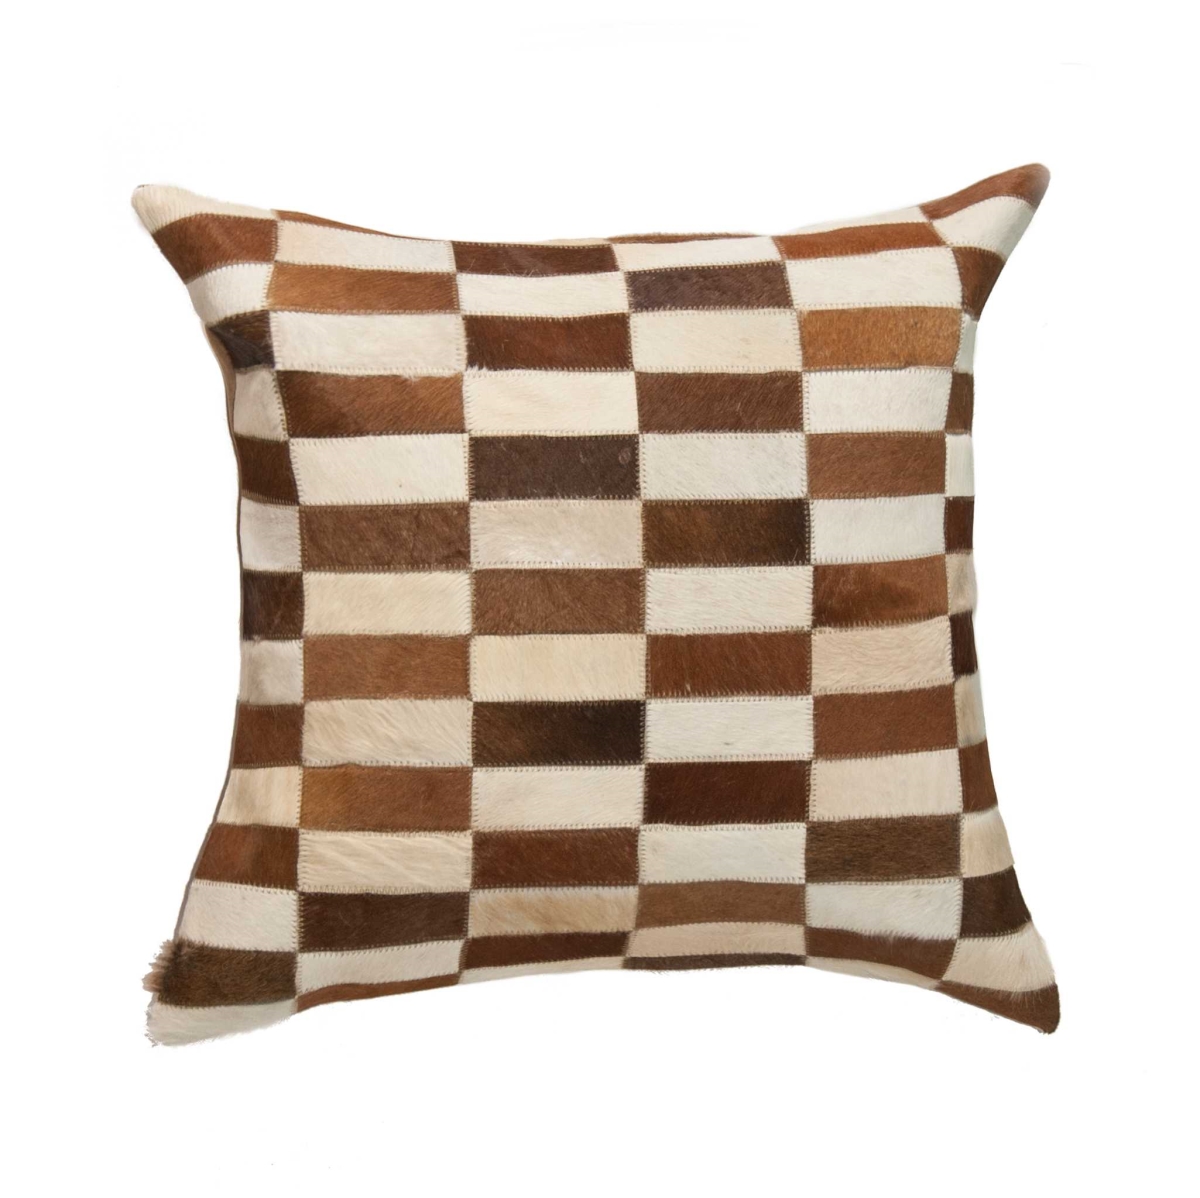 Home Roots Beddings 332303 Torino Classic Large Linear Cowhide Pillow, Brown & White - 22 X 22 In.